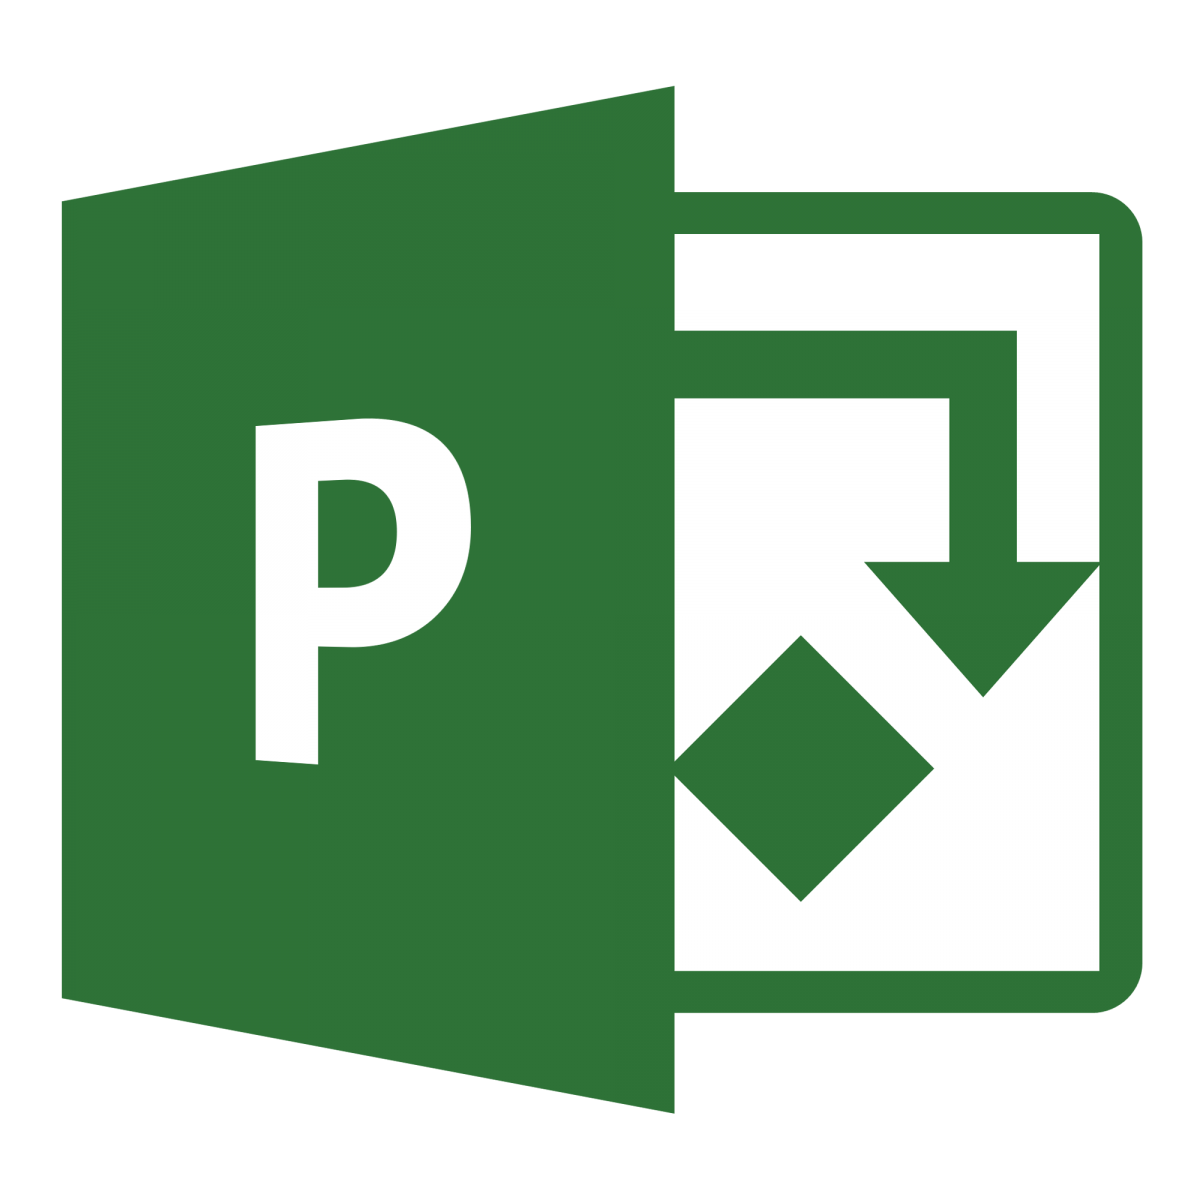 download microsoft project 2013 professional